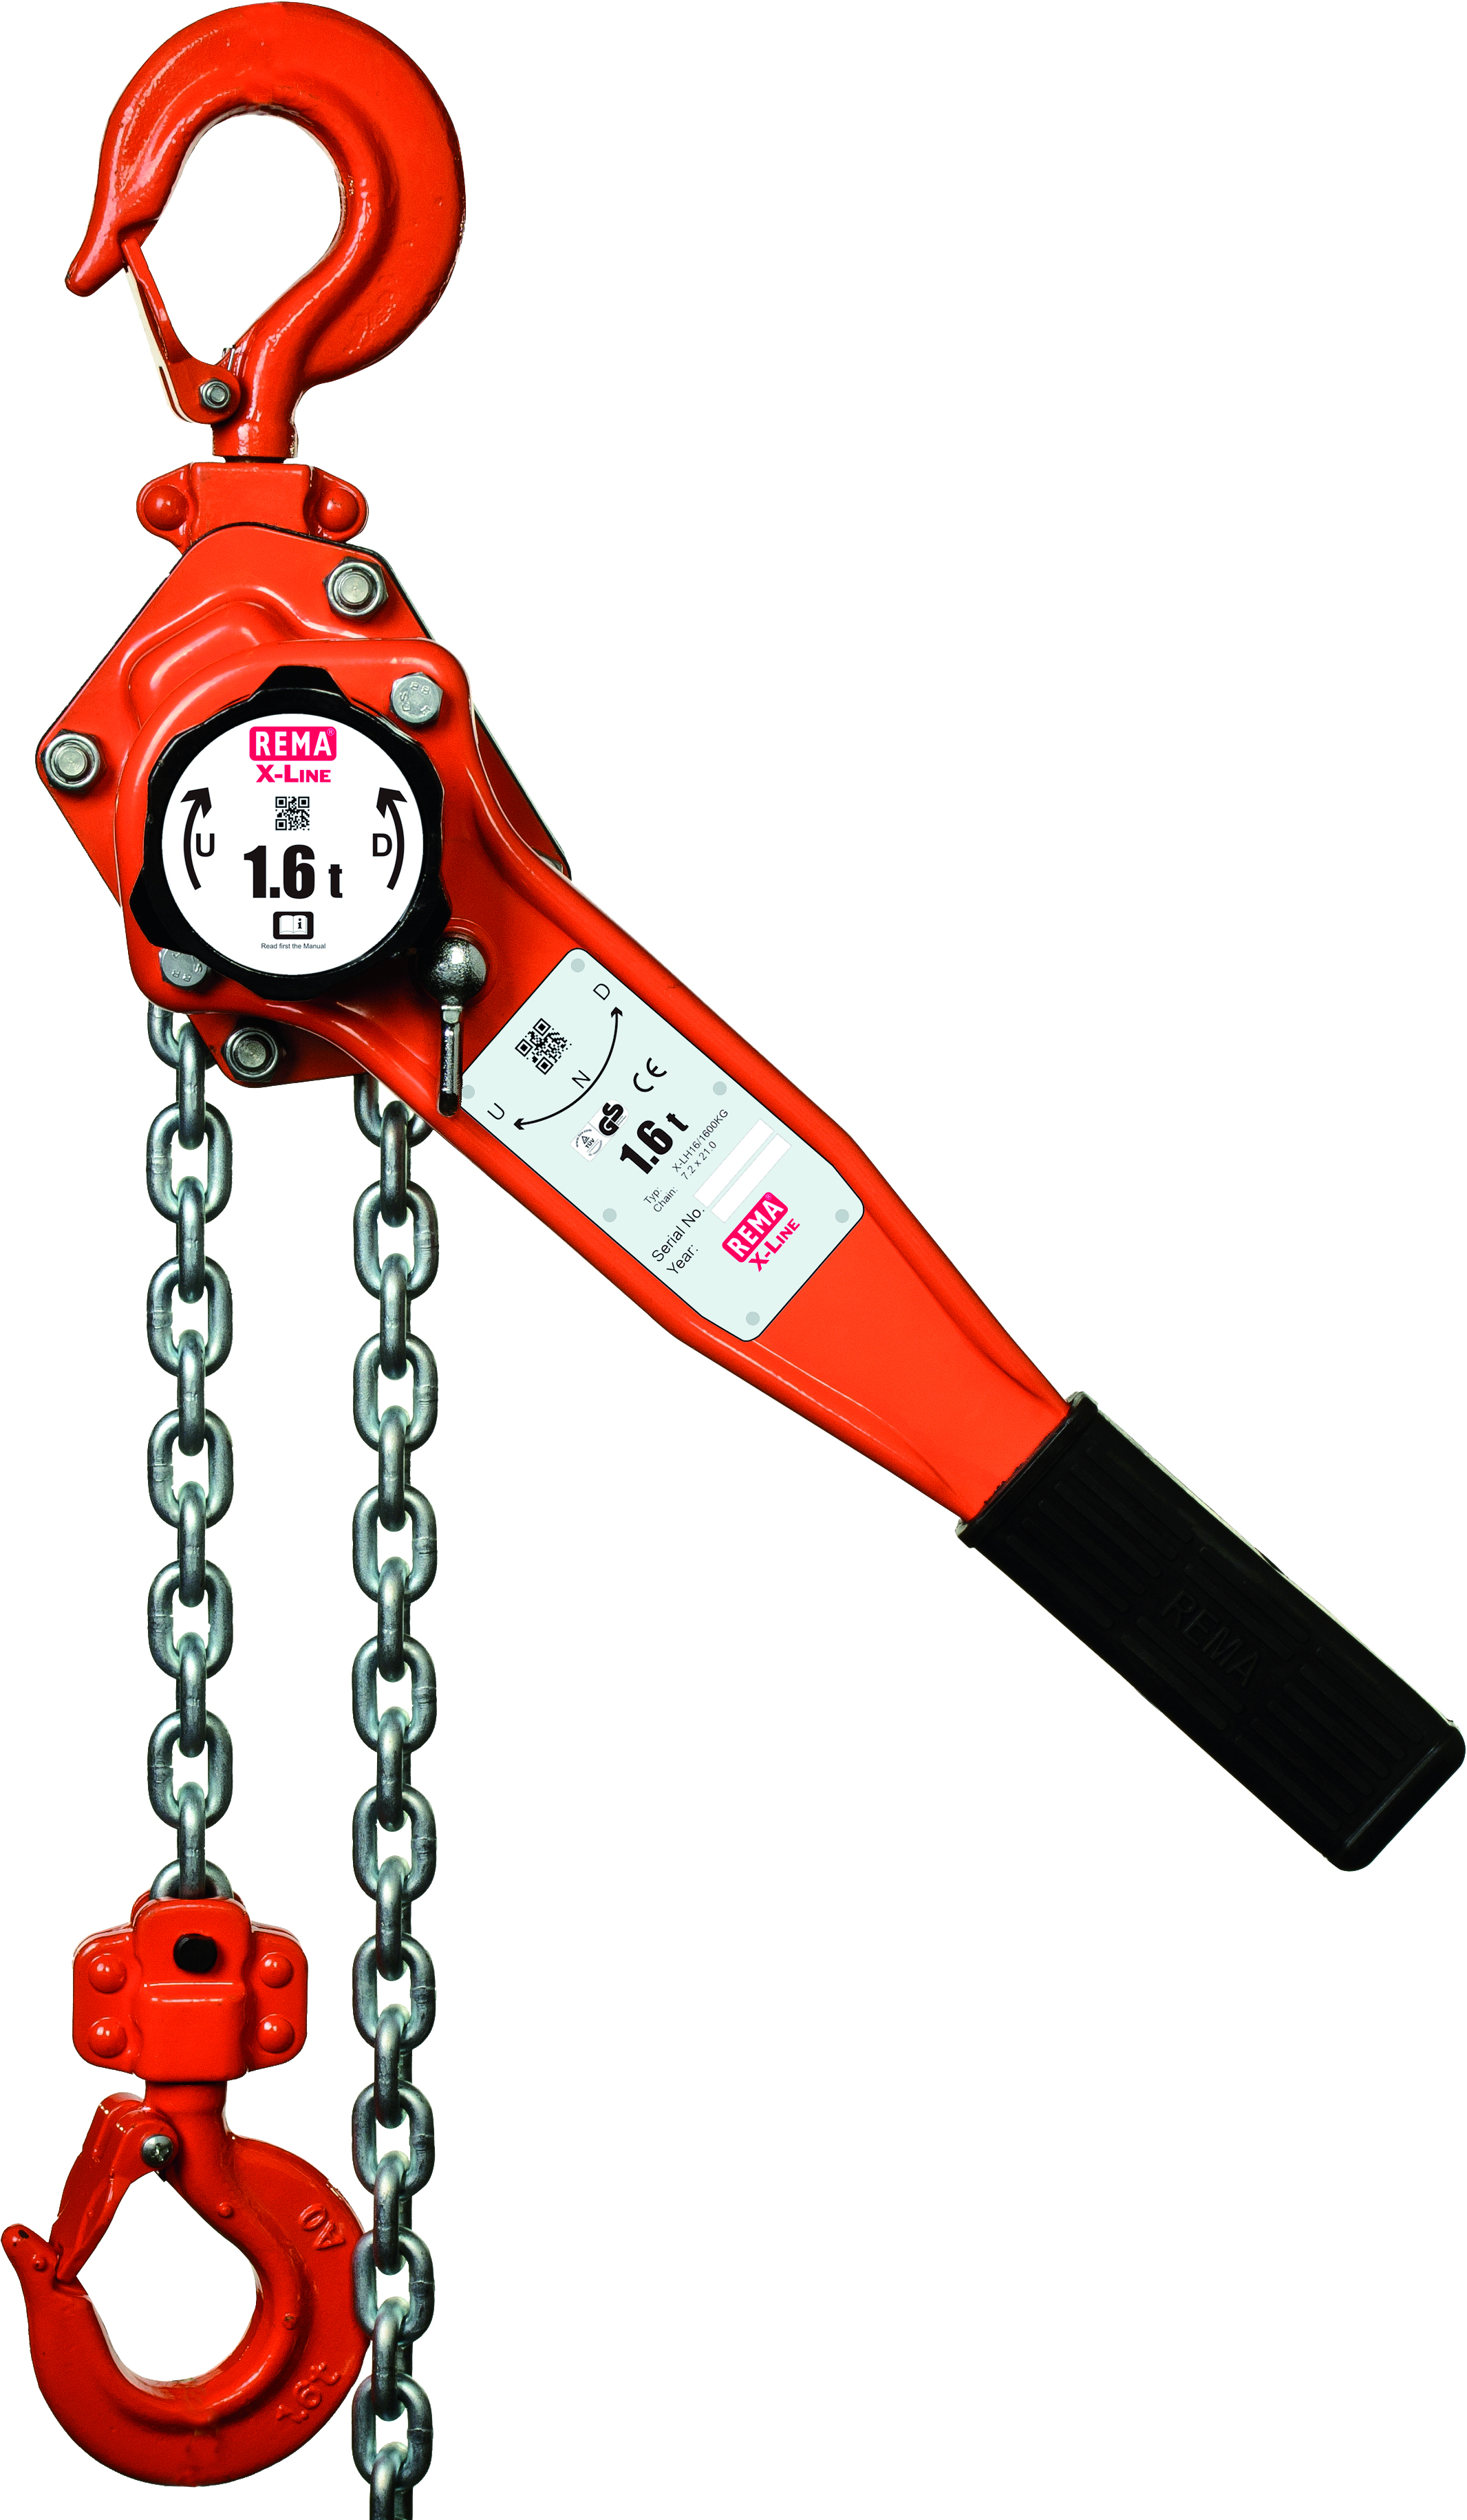 Rema launches new range of chain blocks and lever hoists.